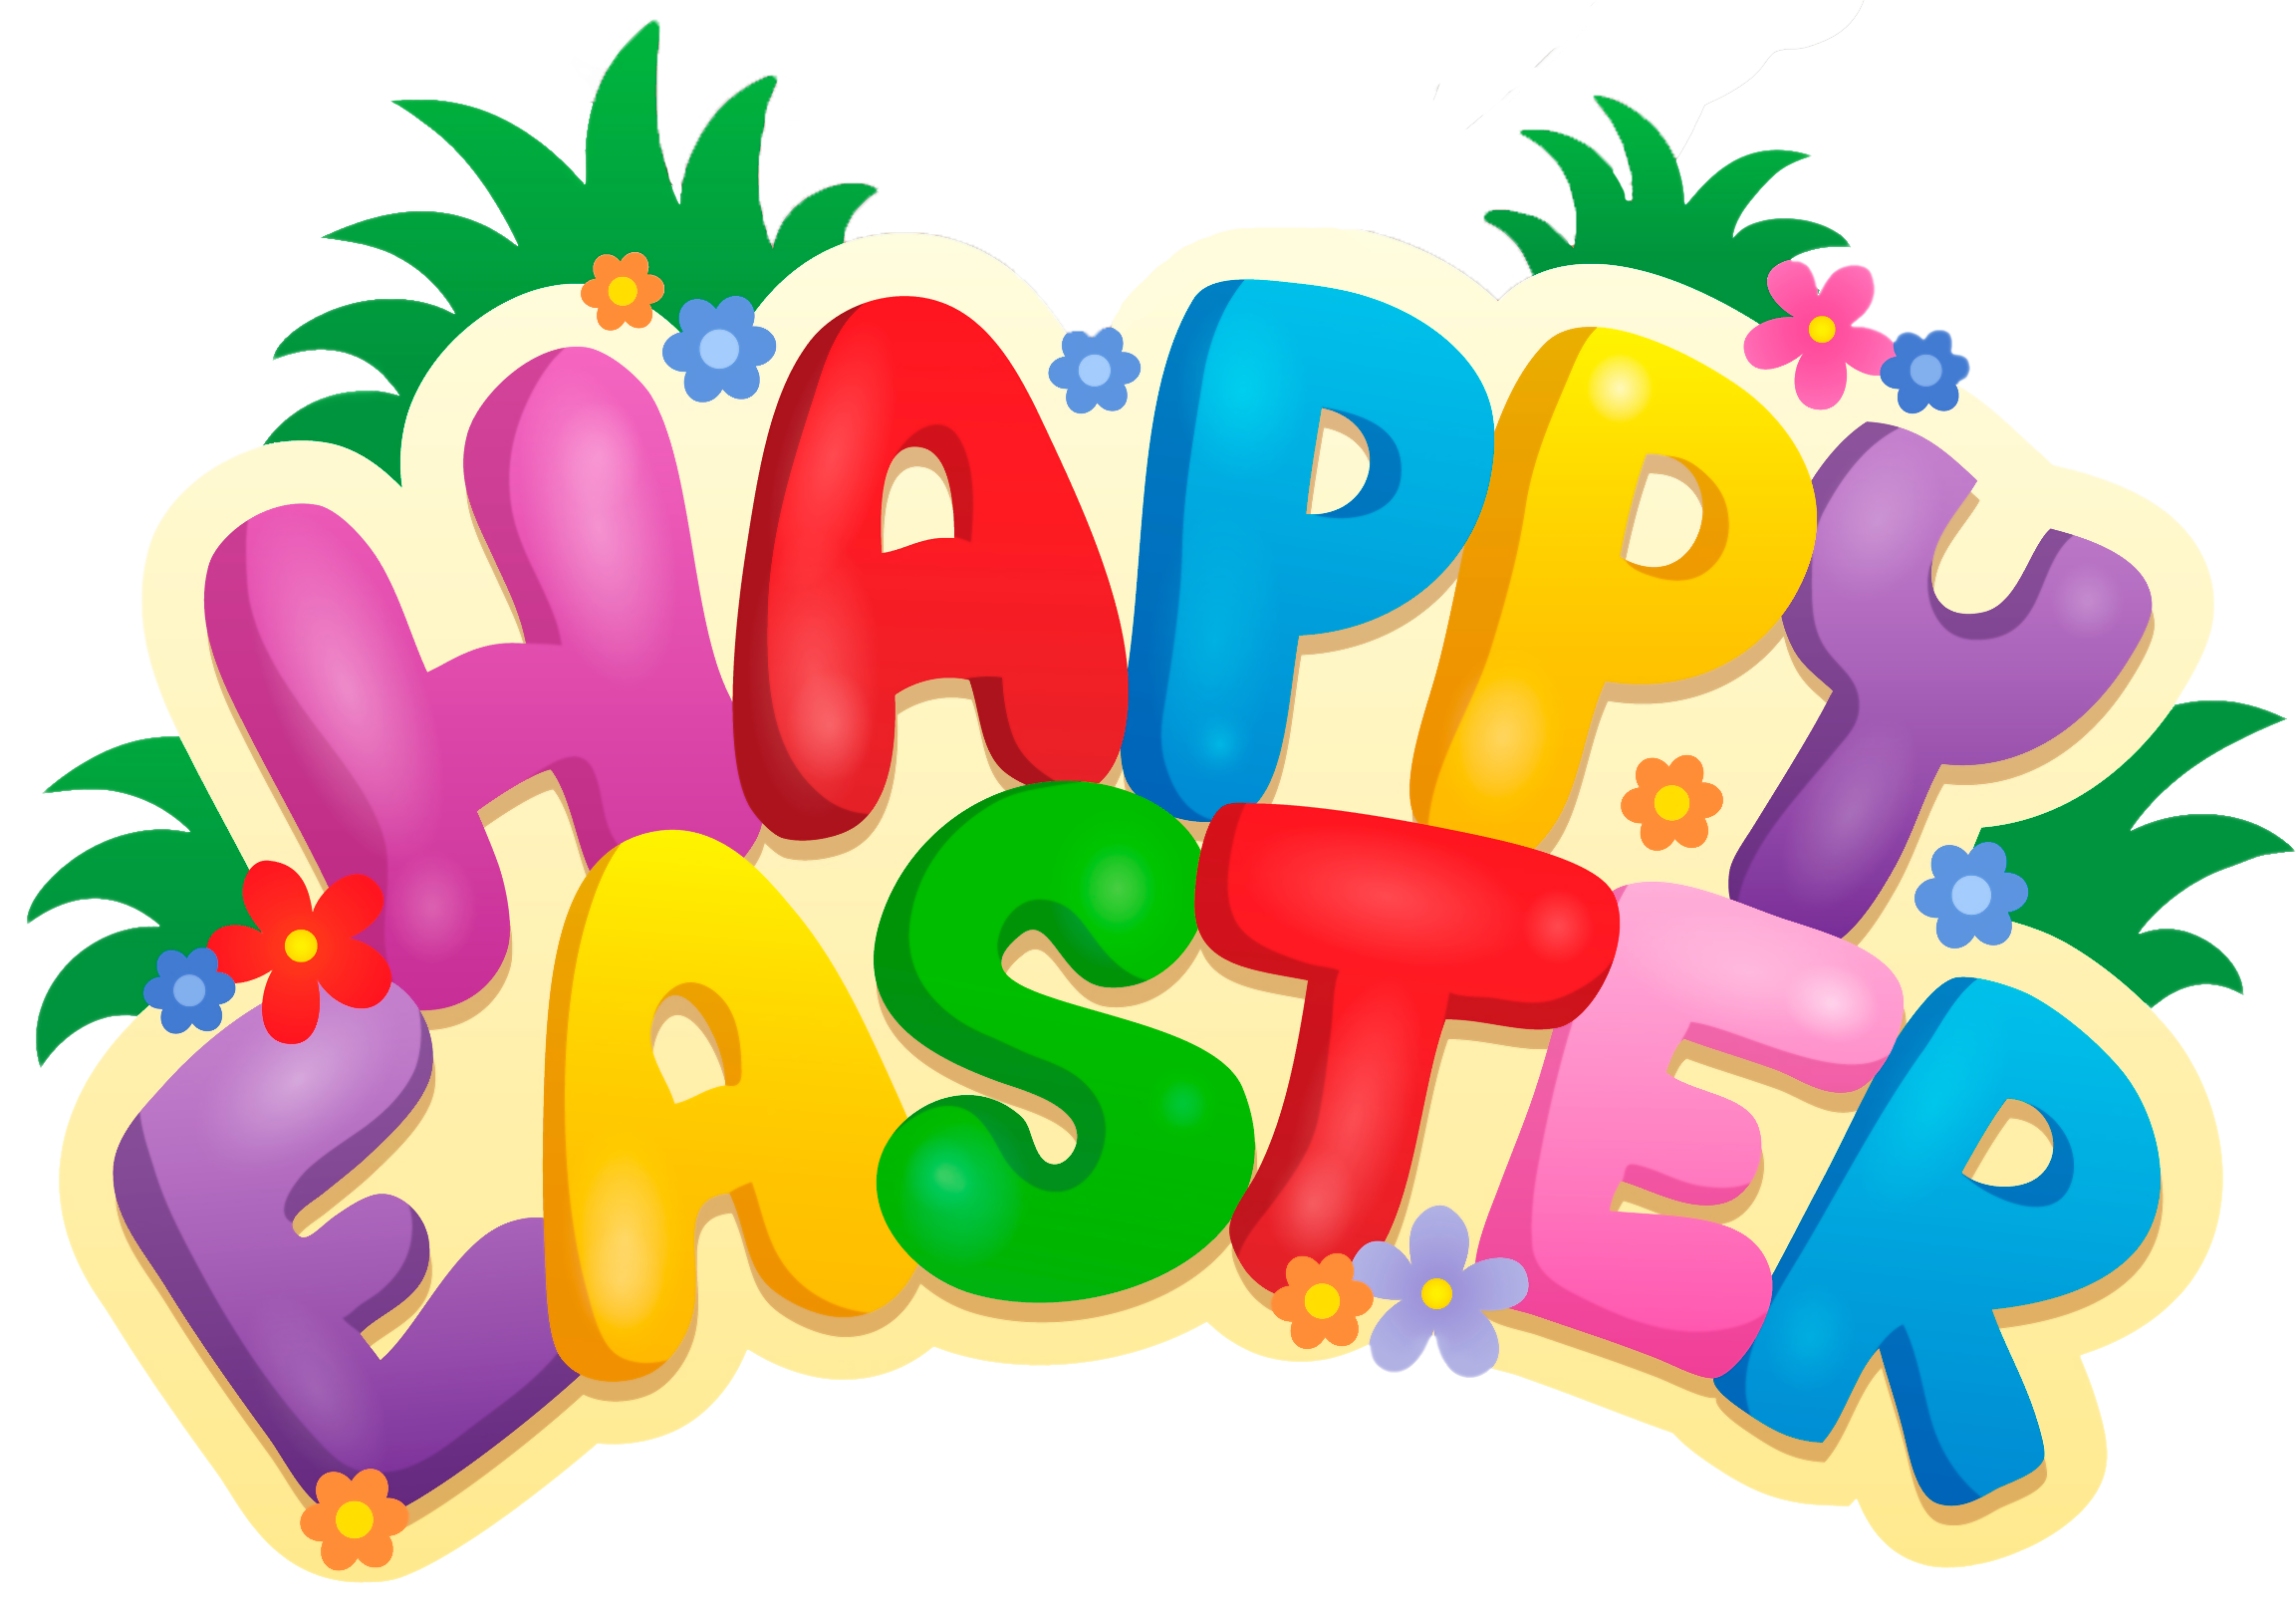 No Ecat Bus U0026 Uwf Trolley Service On Easter Sunday, April 16Th. Beach Trolleys Will Run On Easter Sunday From 5:00 Pm To 1:00 Am. - Easter Sunday, Transparent background PNG HD thumbnail